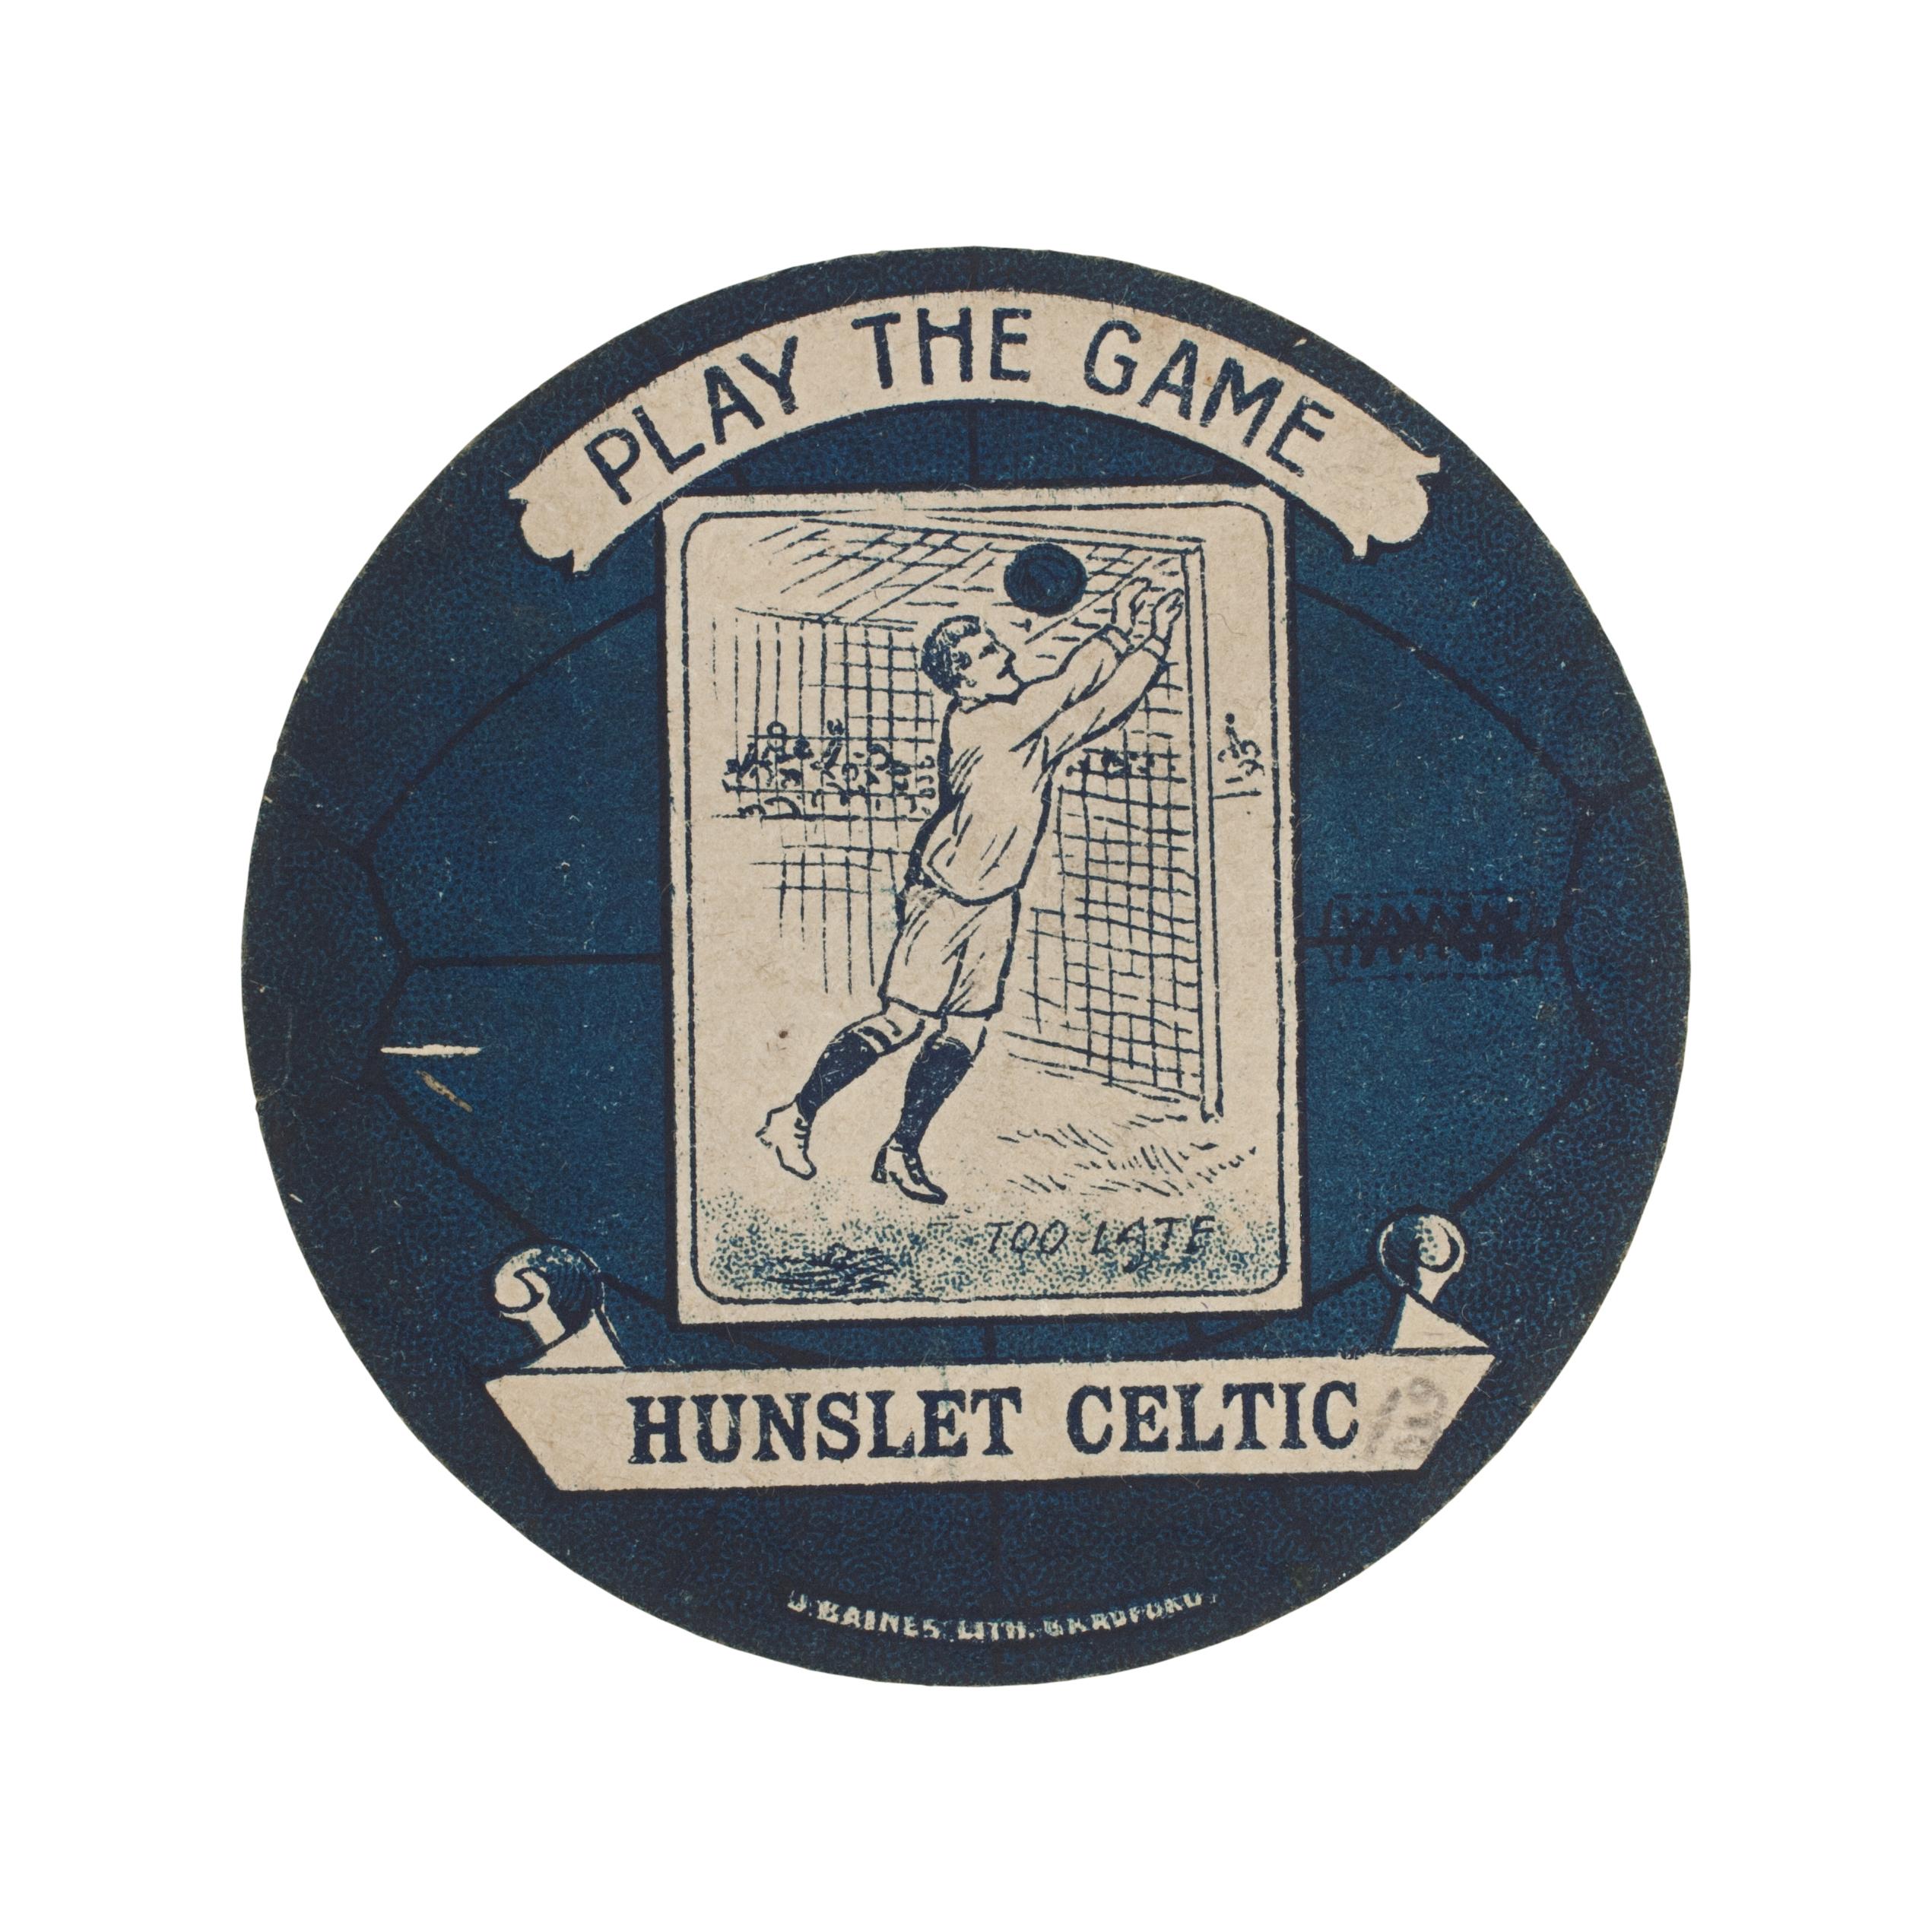 Baines football trade card, Hunslet Celtic, Play The Game.
A rare circular football trade card in the shape of a leather football ball. Made by the toy shop owner from Bradford, John Baines. Baines went on to produce not only football cards but